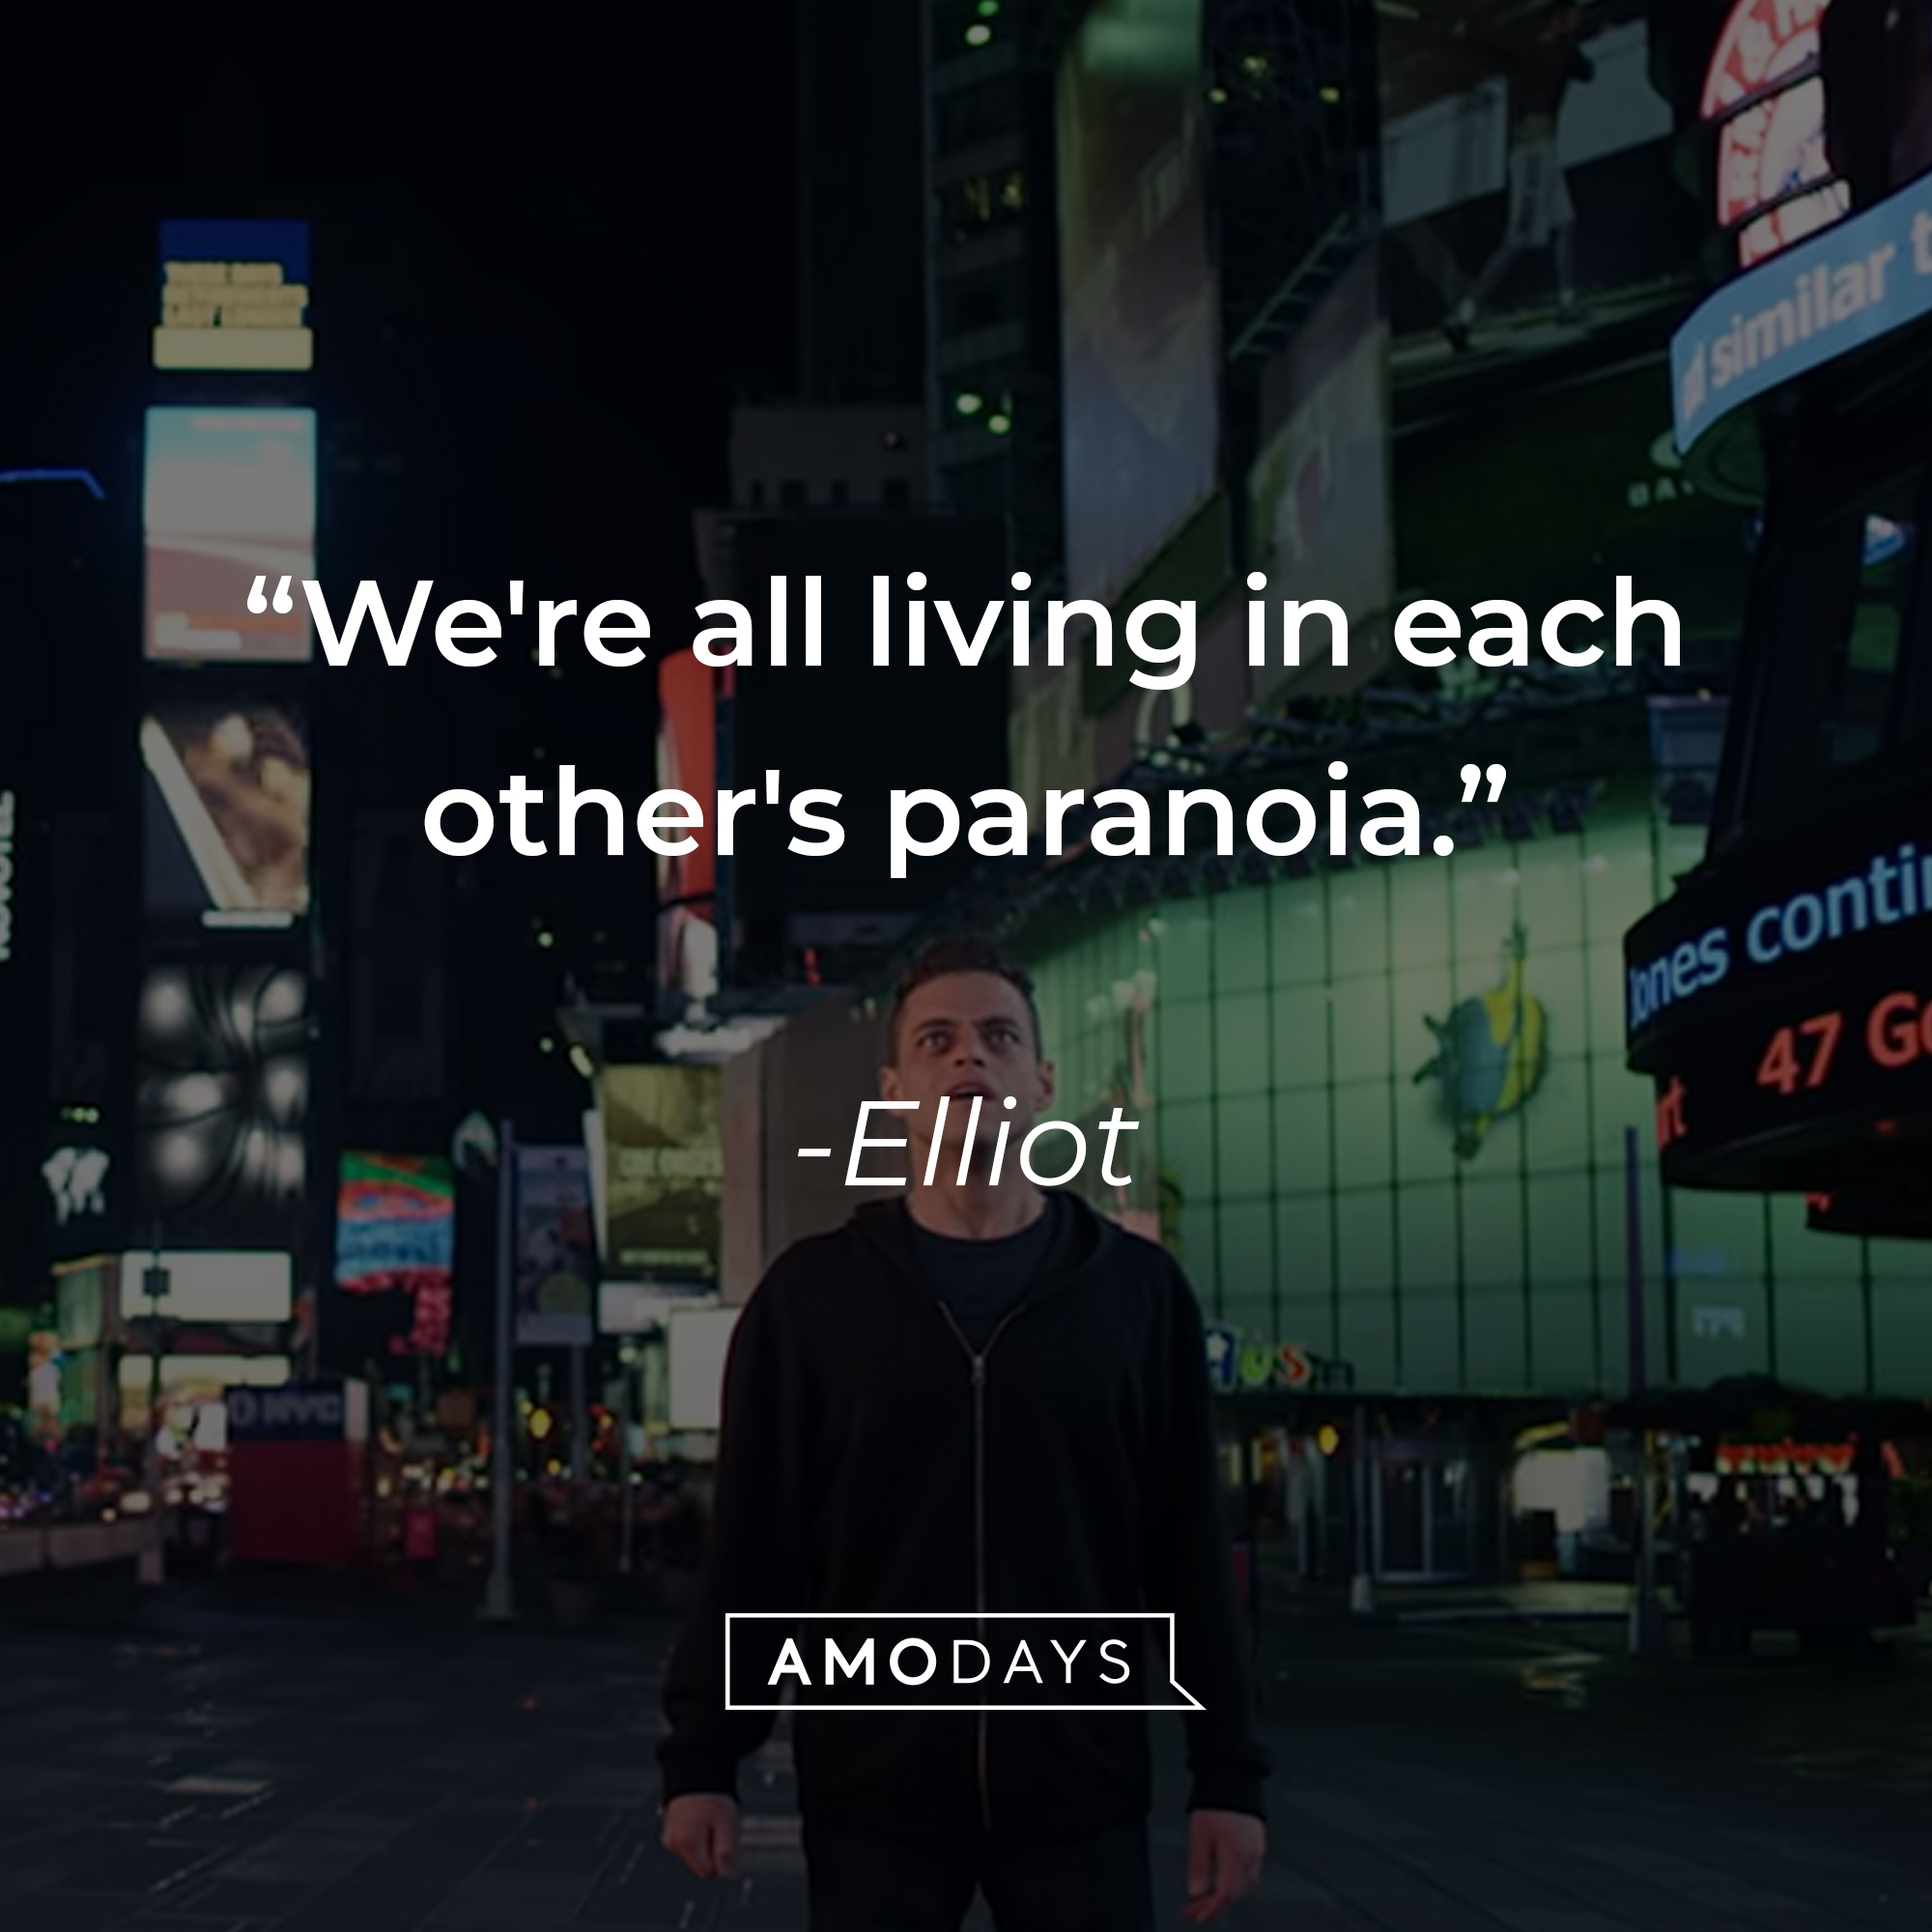 Elliot's quote: "We're all living in each other's paranoia." | Source: youtube.com/MrRobot